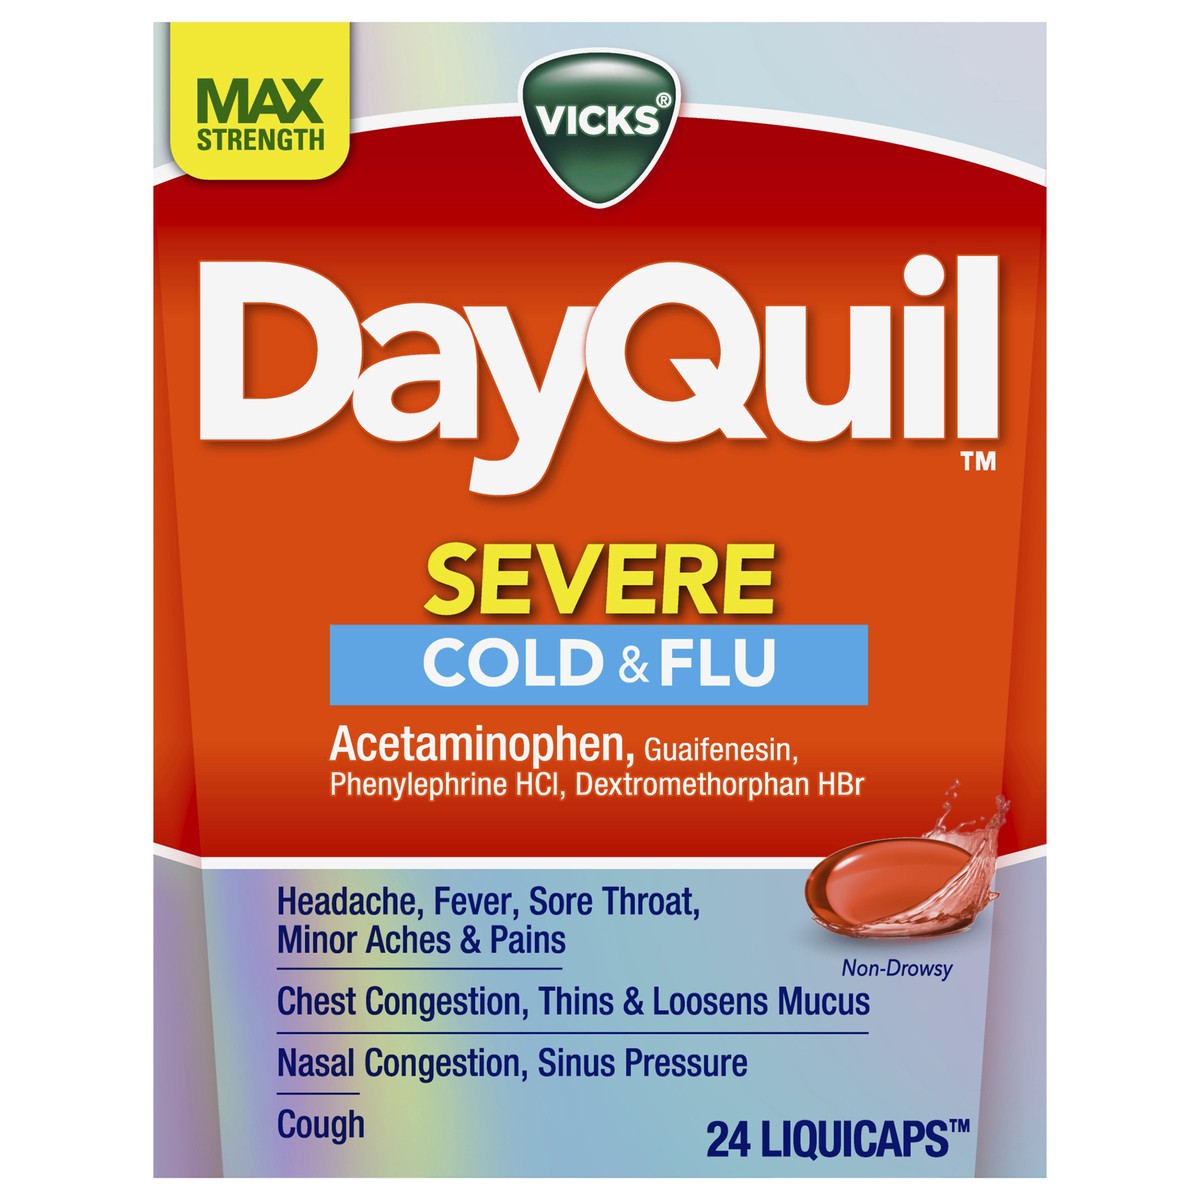 slide 1 of 46, Vicks DayQuil SEVERE Cold & Flu Medicine, Maximum Strength 9-Symptom Non-Drowsy Daytime Relief for Headache, Fever, Sore Throat, Minor Aches and Pains, Chest Congestion, Stuffy Nose, Nasal Congestion, Sinus Pressure, and Cough, 24 Liquicaps, 24 ct